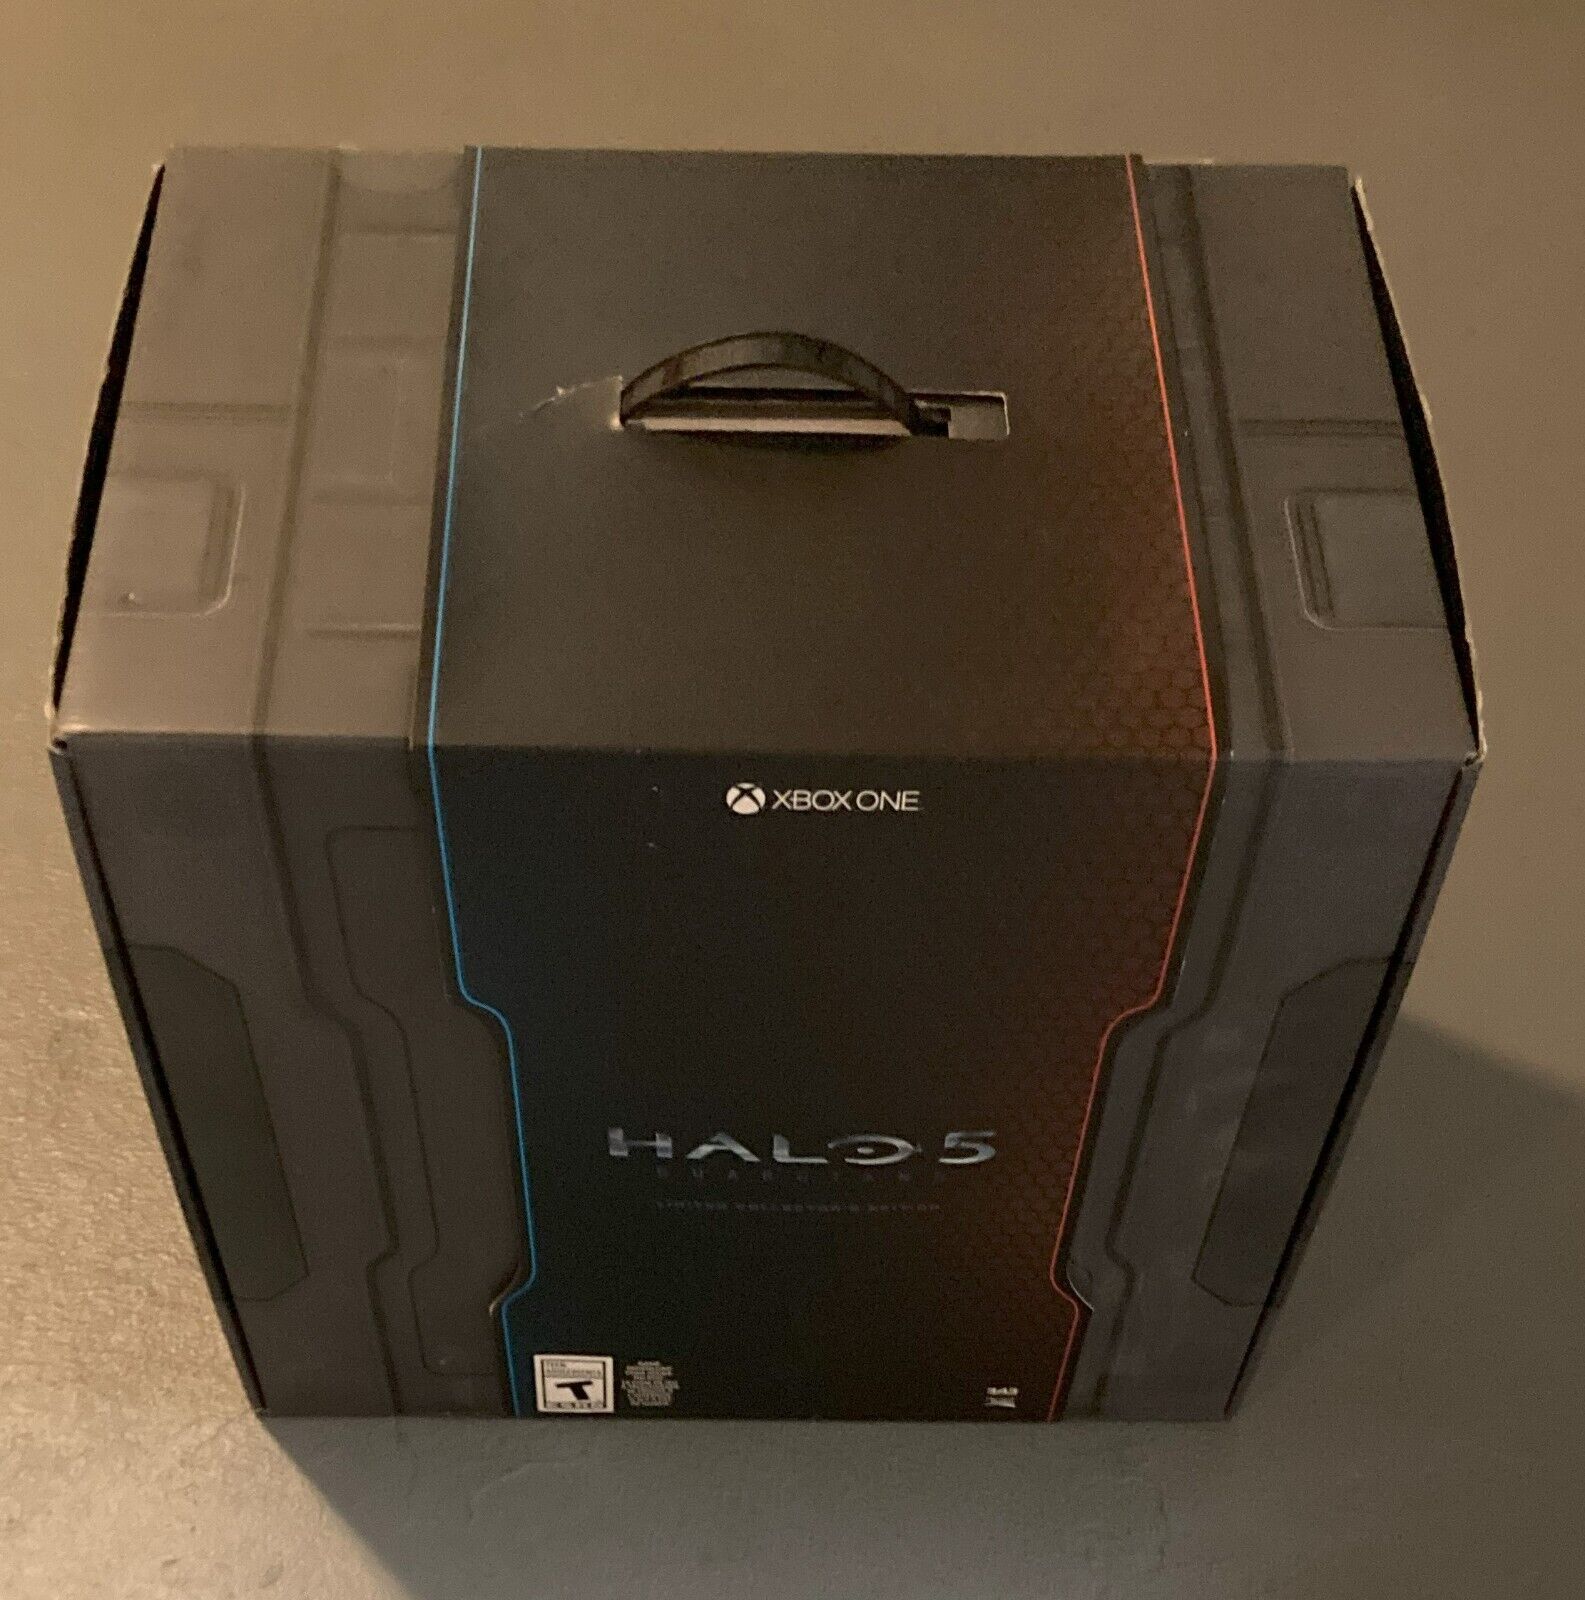 Halo 5: Guardians Limited Collector's Edition - Xbox One (USED: VERY GOOD)